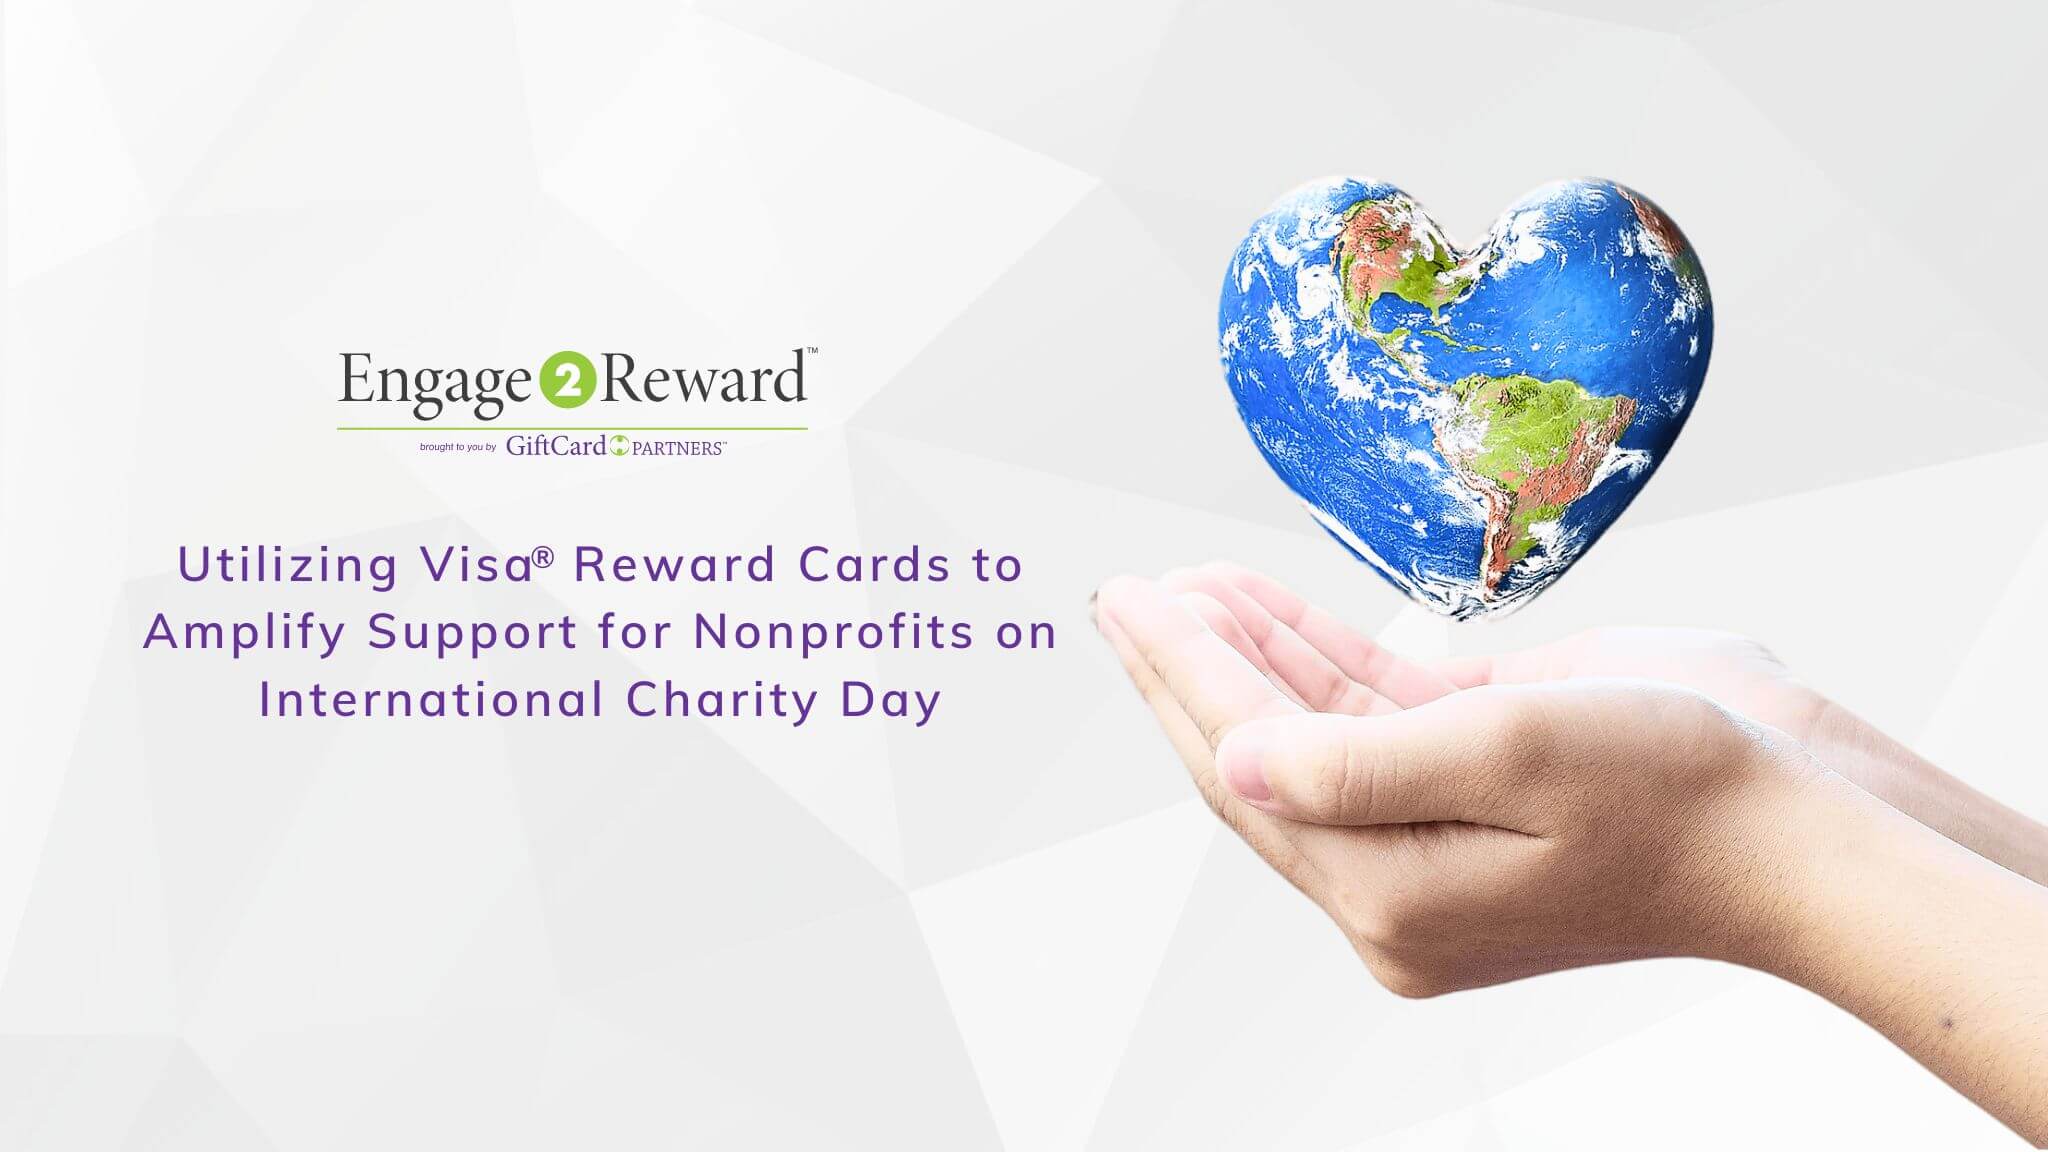 Utilizing Visa Reward Cards to Amplify Support for Nonprofits on International Charity Day